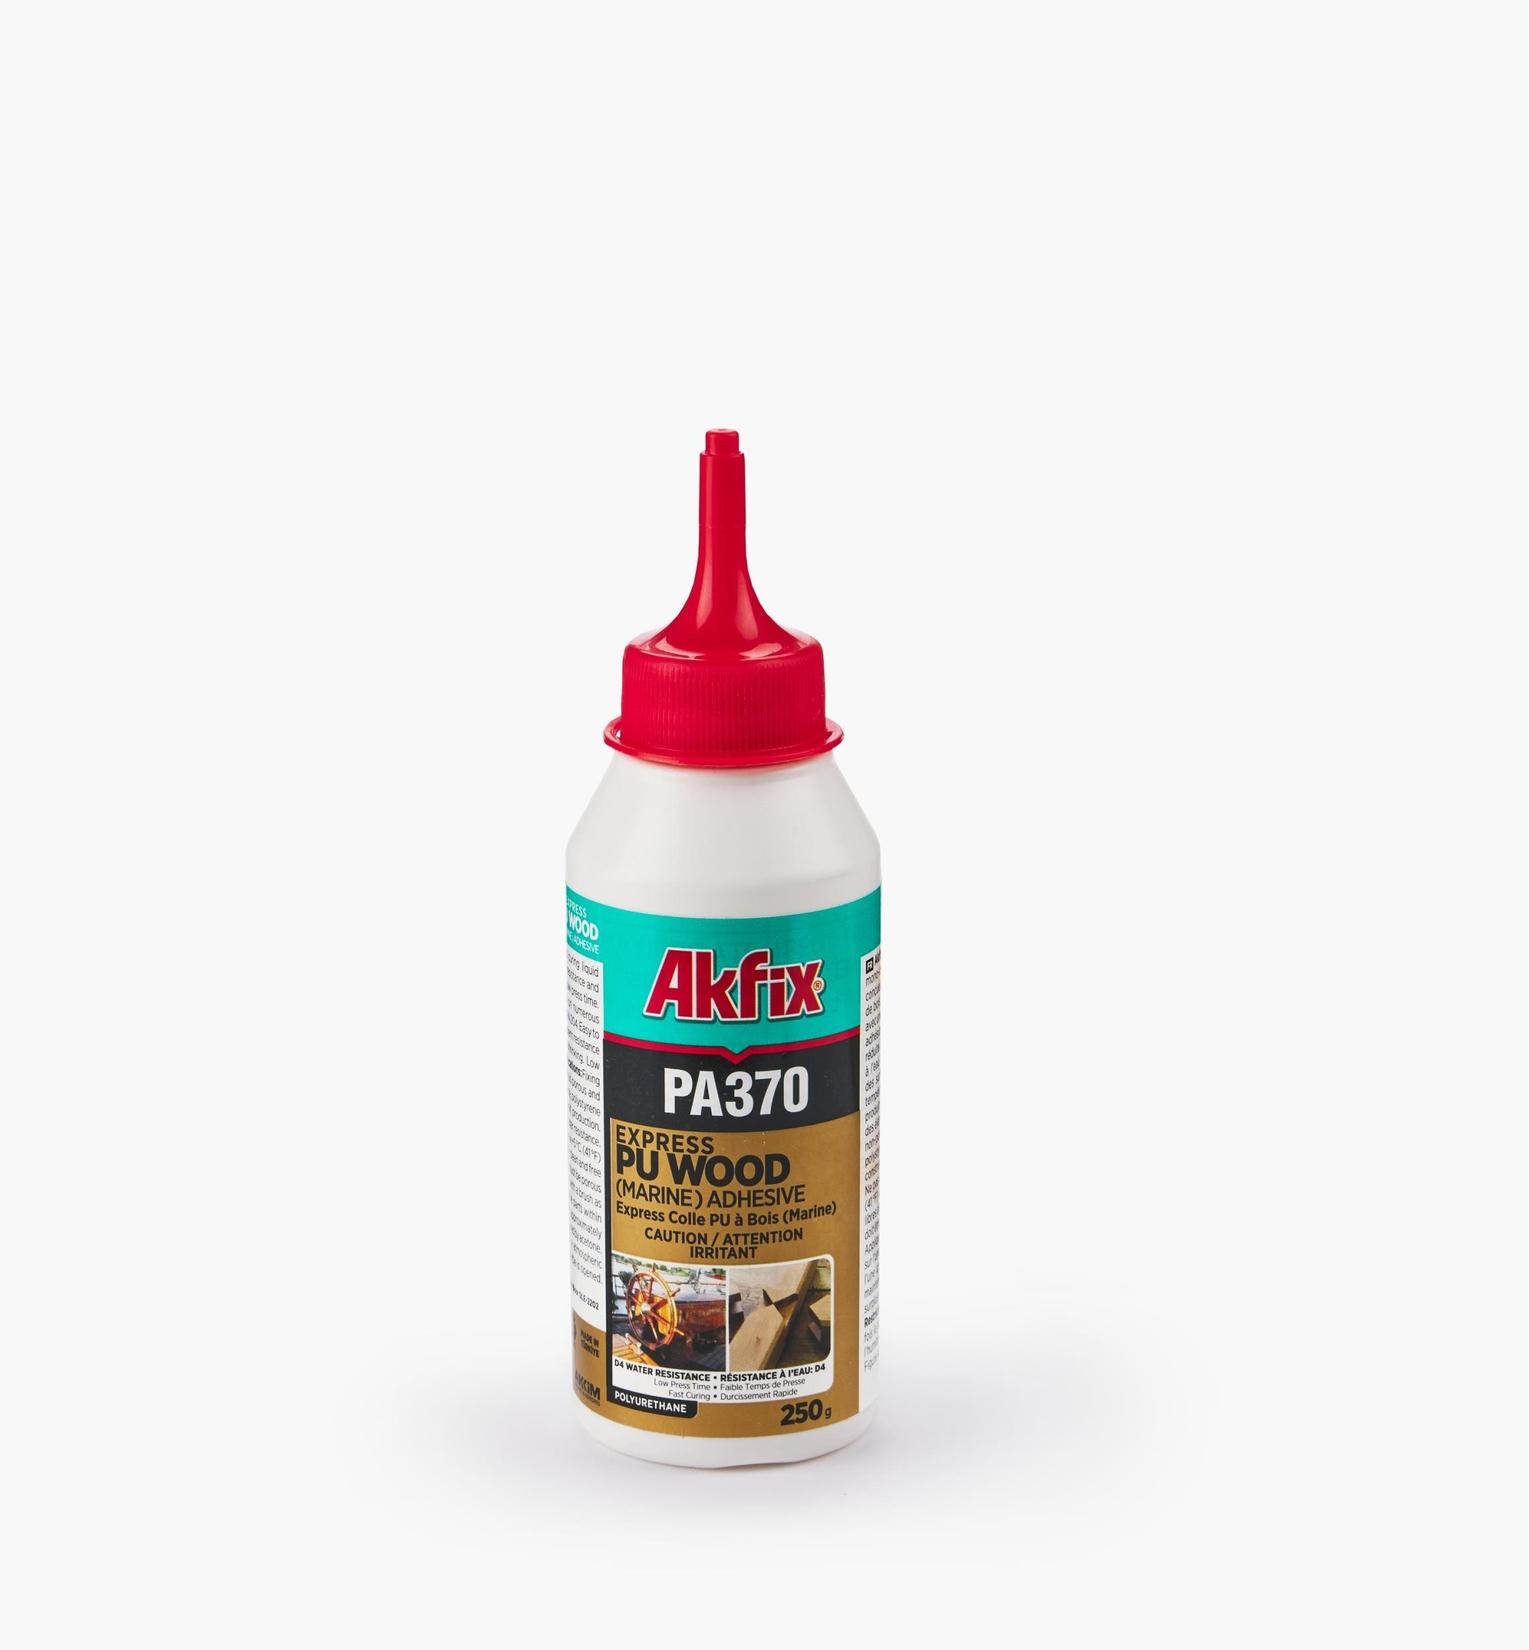 Akfix PA370 Express PU Wood Glue (Marine Adhesive) offers at $16 in Lee Valley Tools